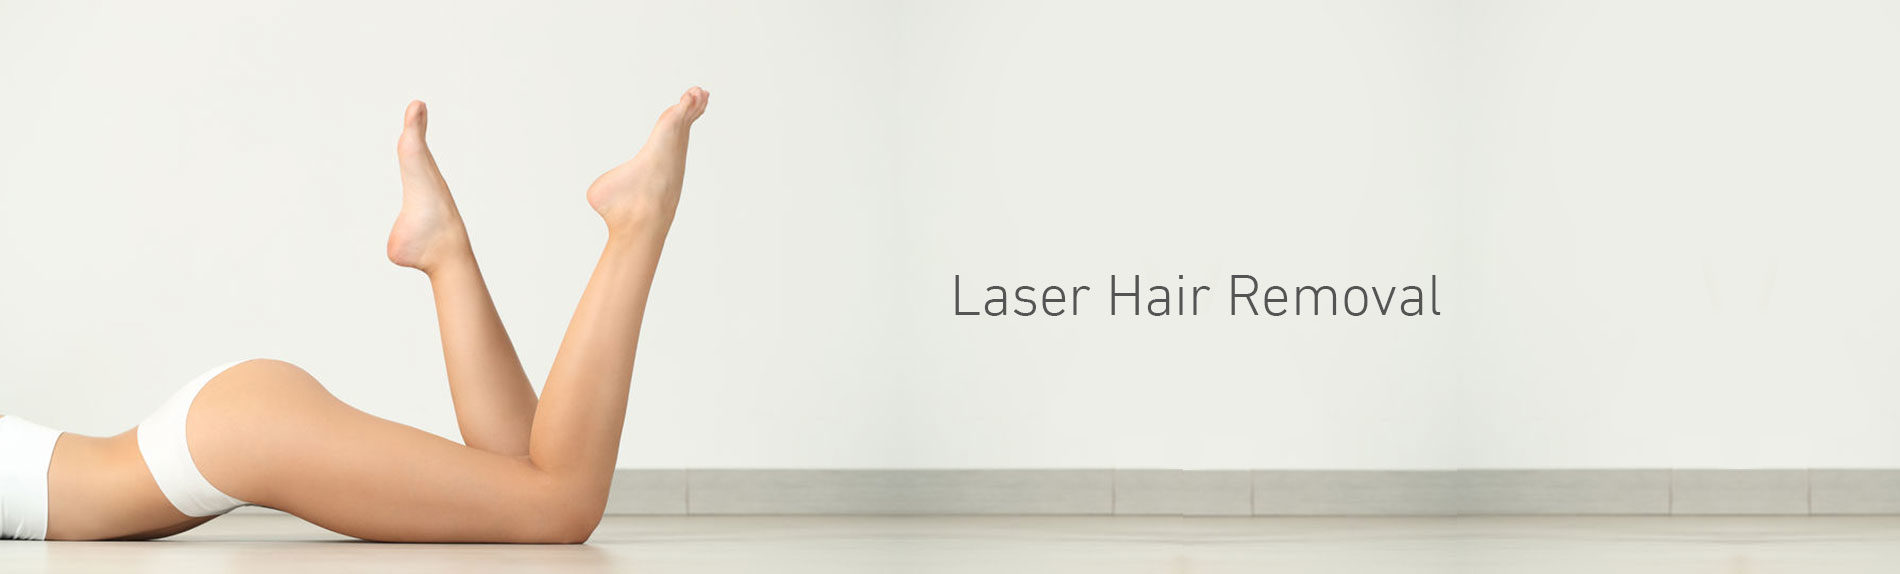 LASER HAIR REMOVAL IN SOUTHAMPTON AT CJA AESTHETICS CLINIC